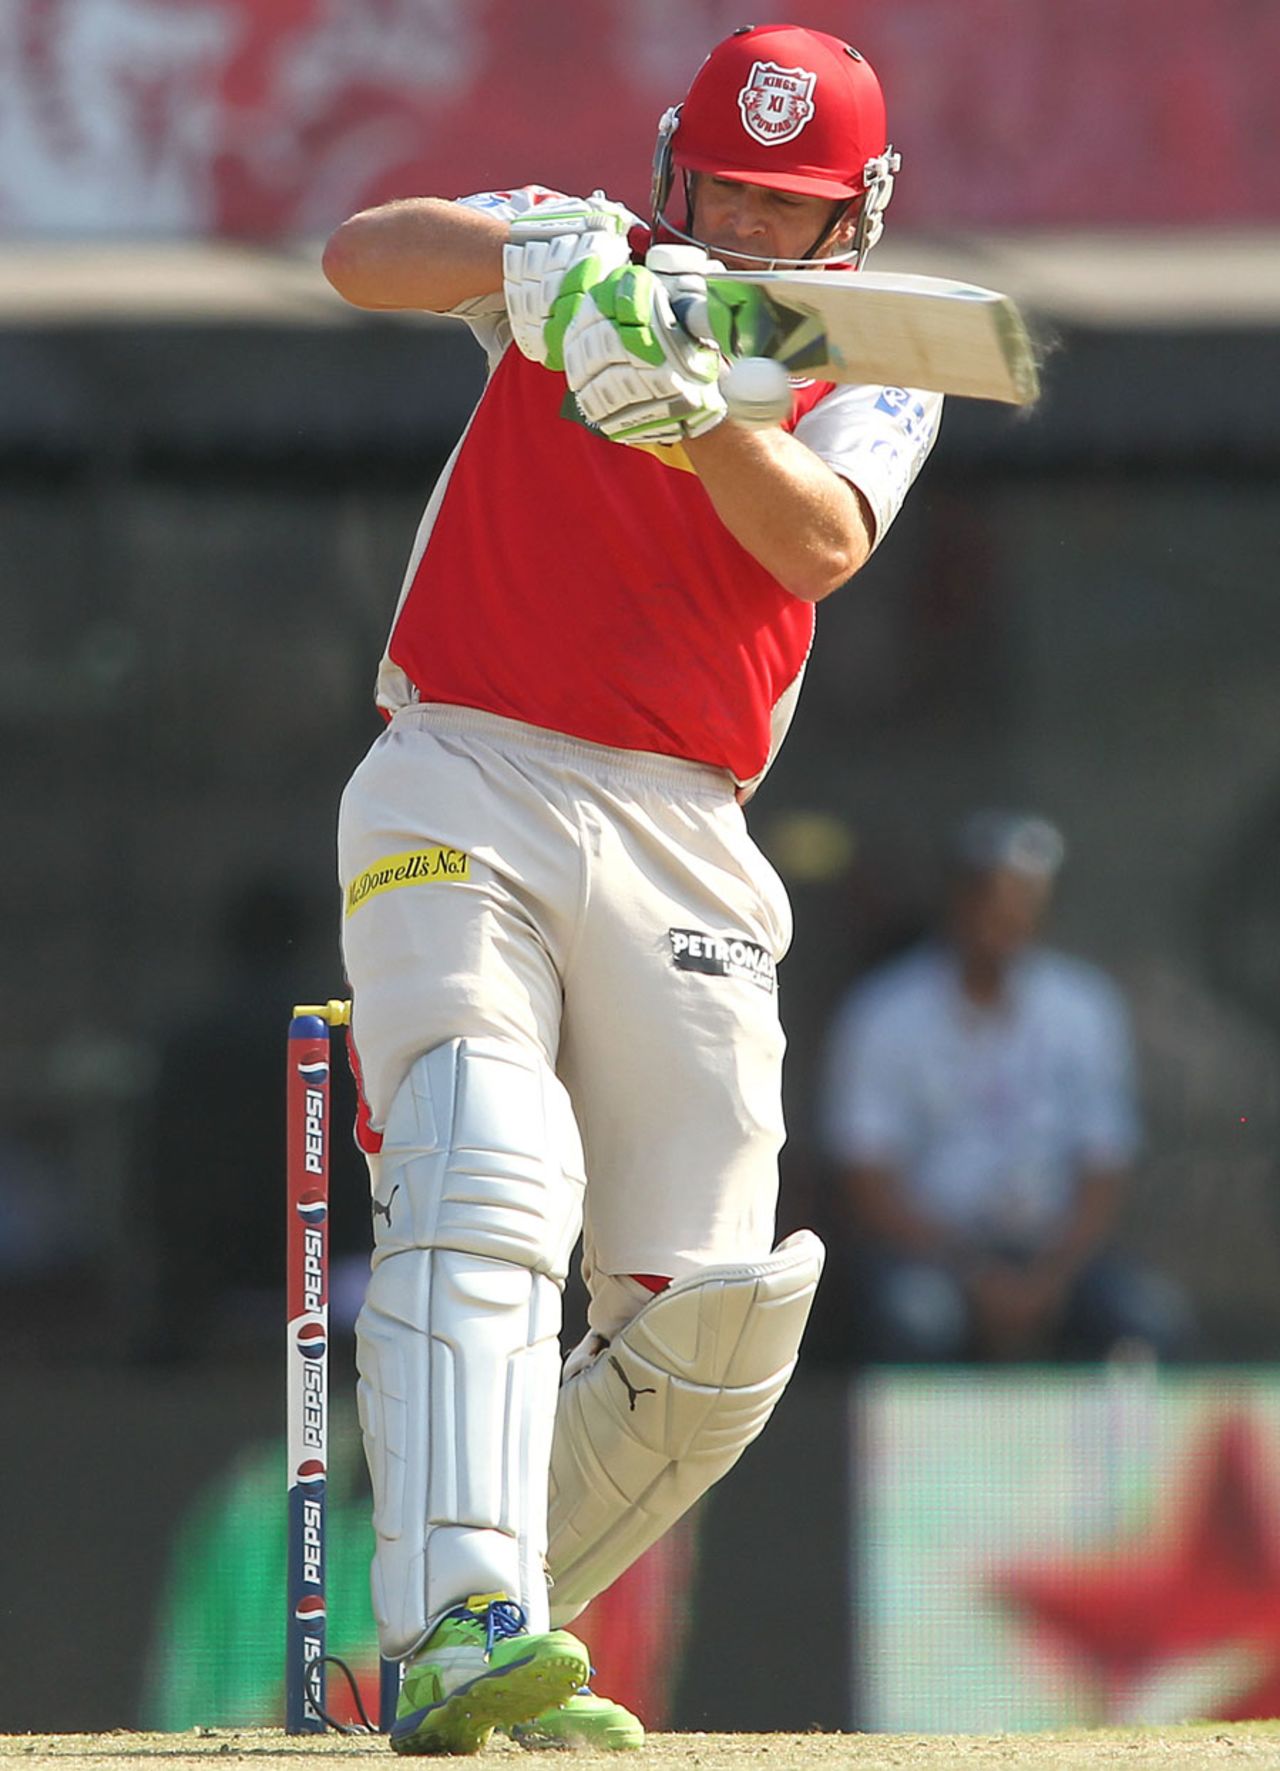 Adam Gilchrist about to pull, Kings XI Punjab v Rajasthan Royals, IPL, Mohali, May 9, 2013